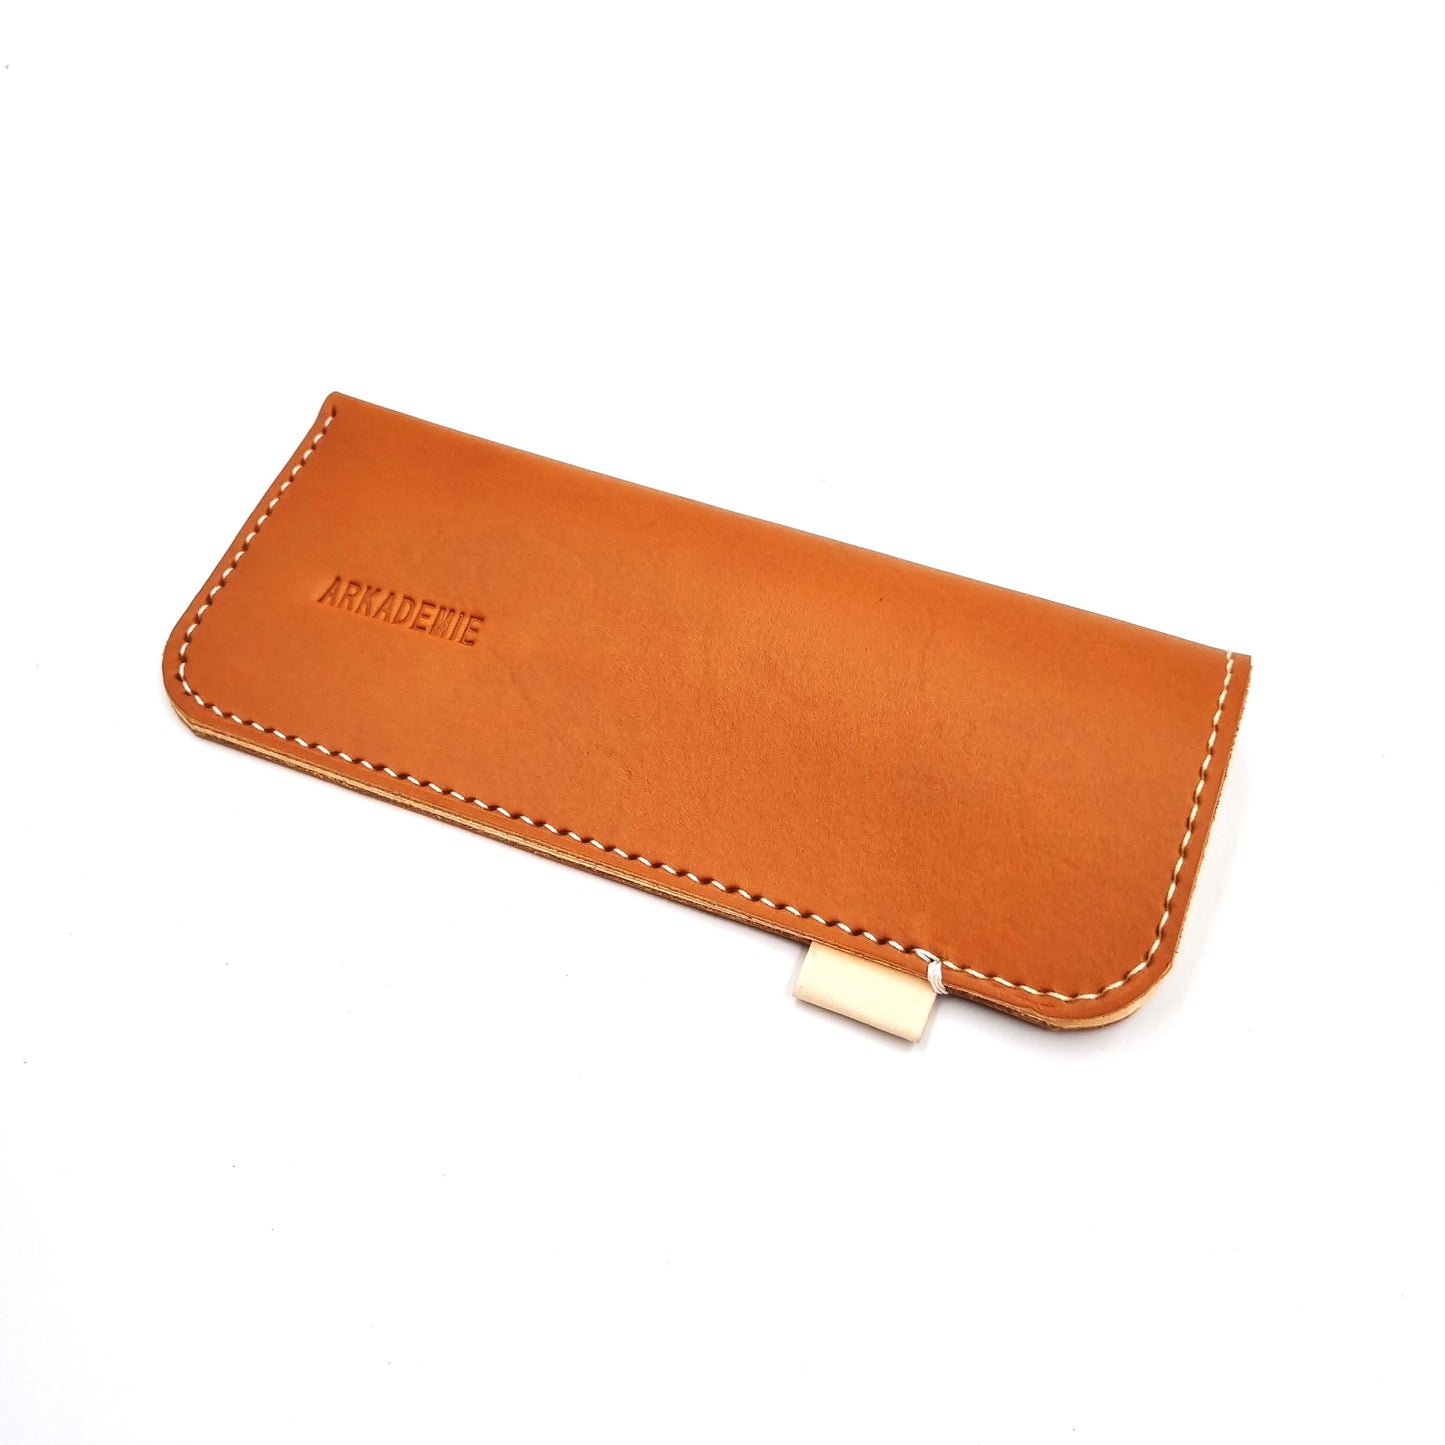 ELI Leather Spectacles Case